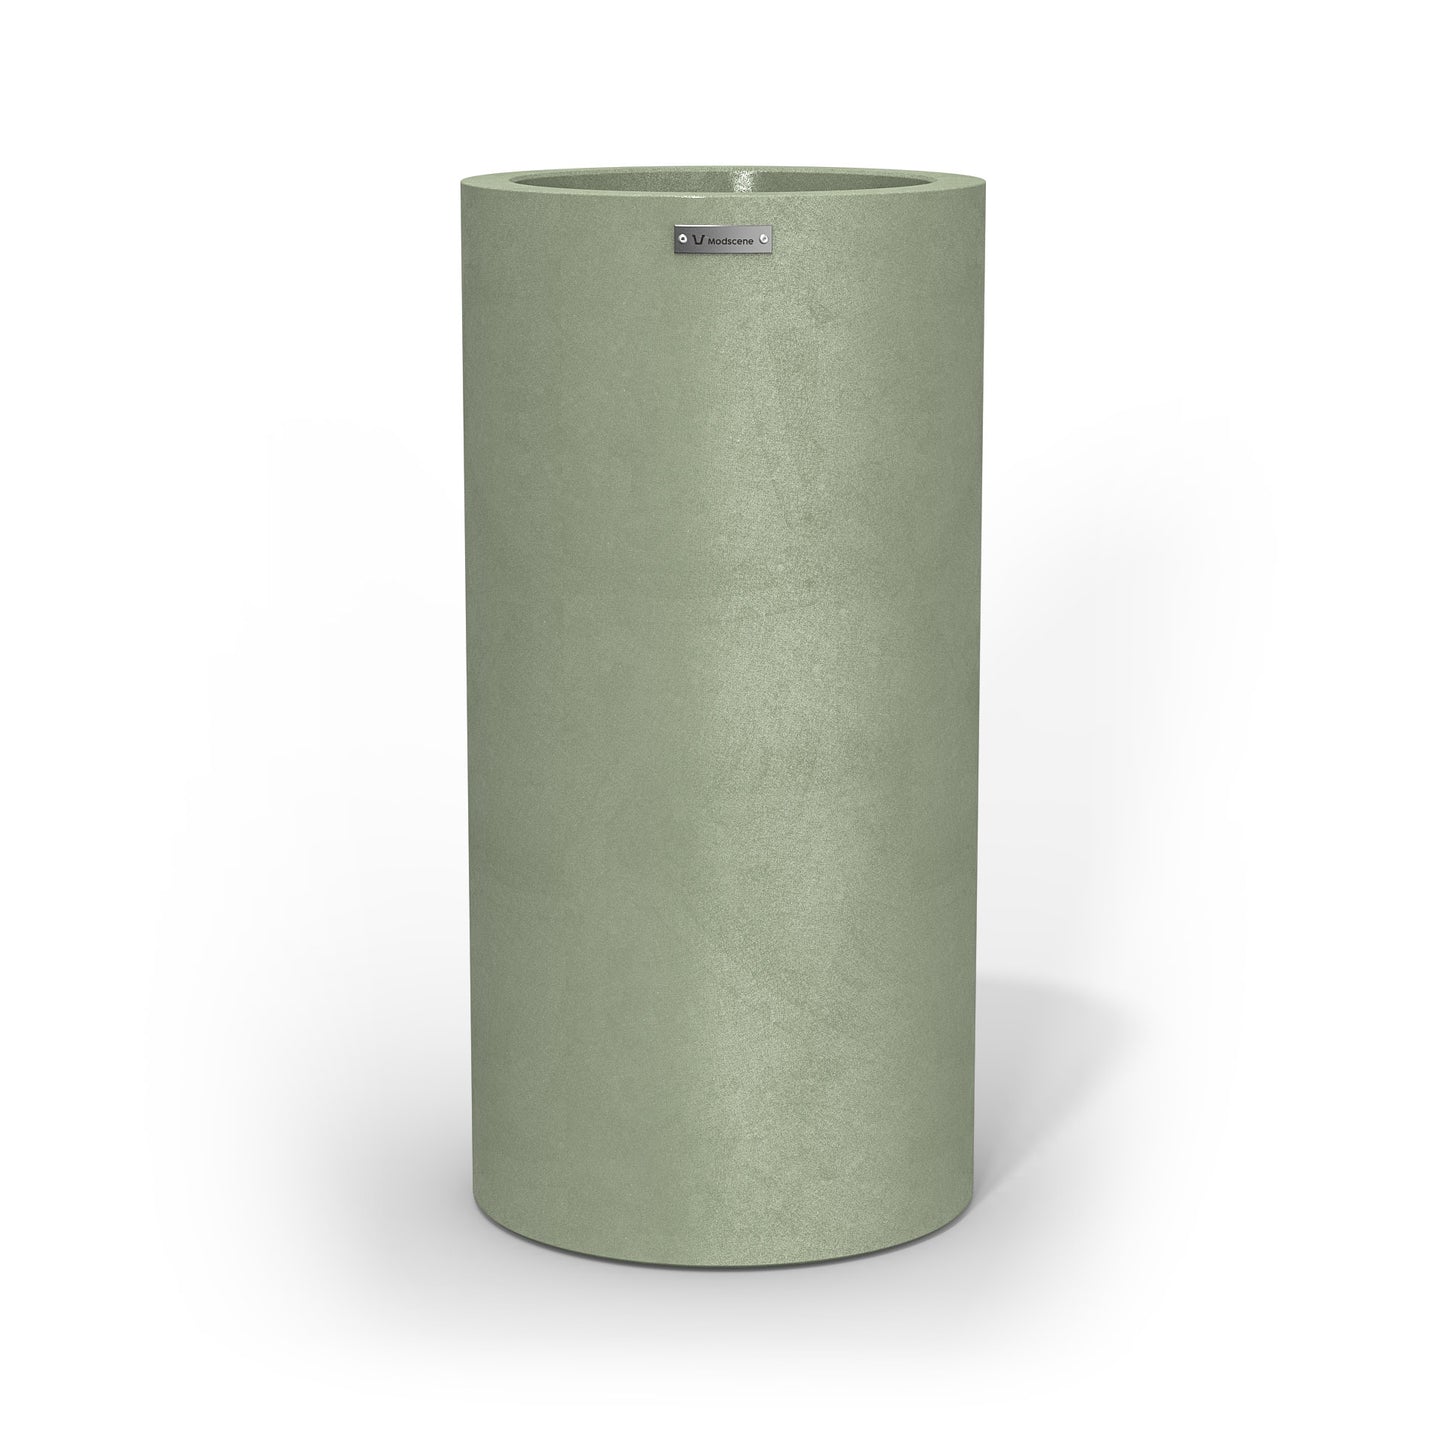 A tall cigar cylinder planter pot in a pastel green colour with a concrete look finish.